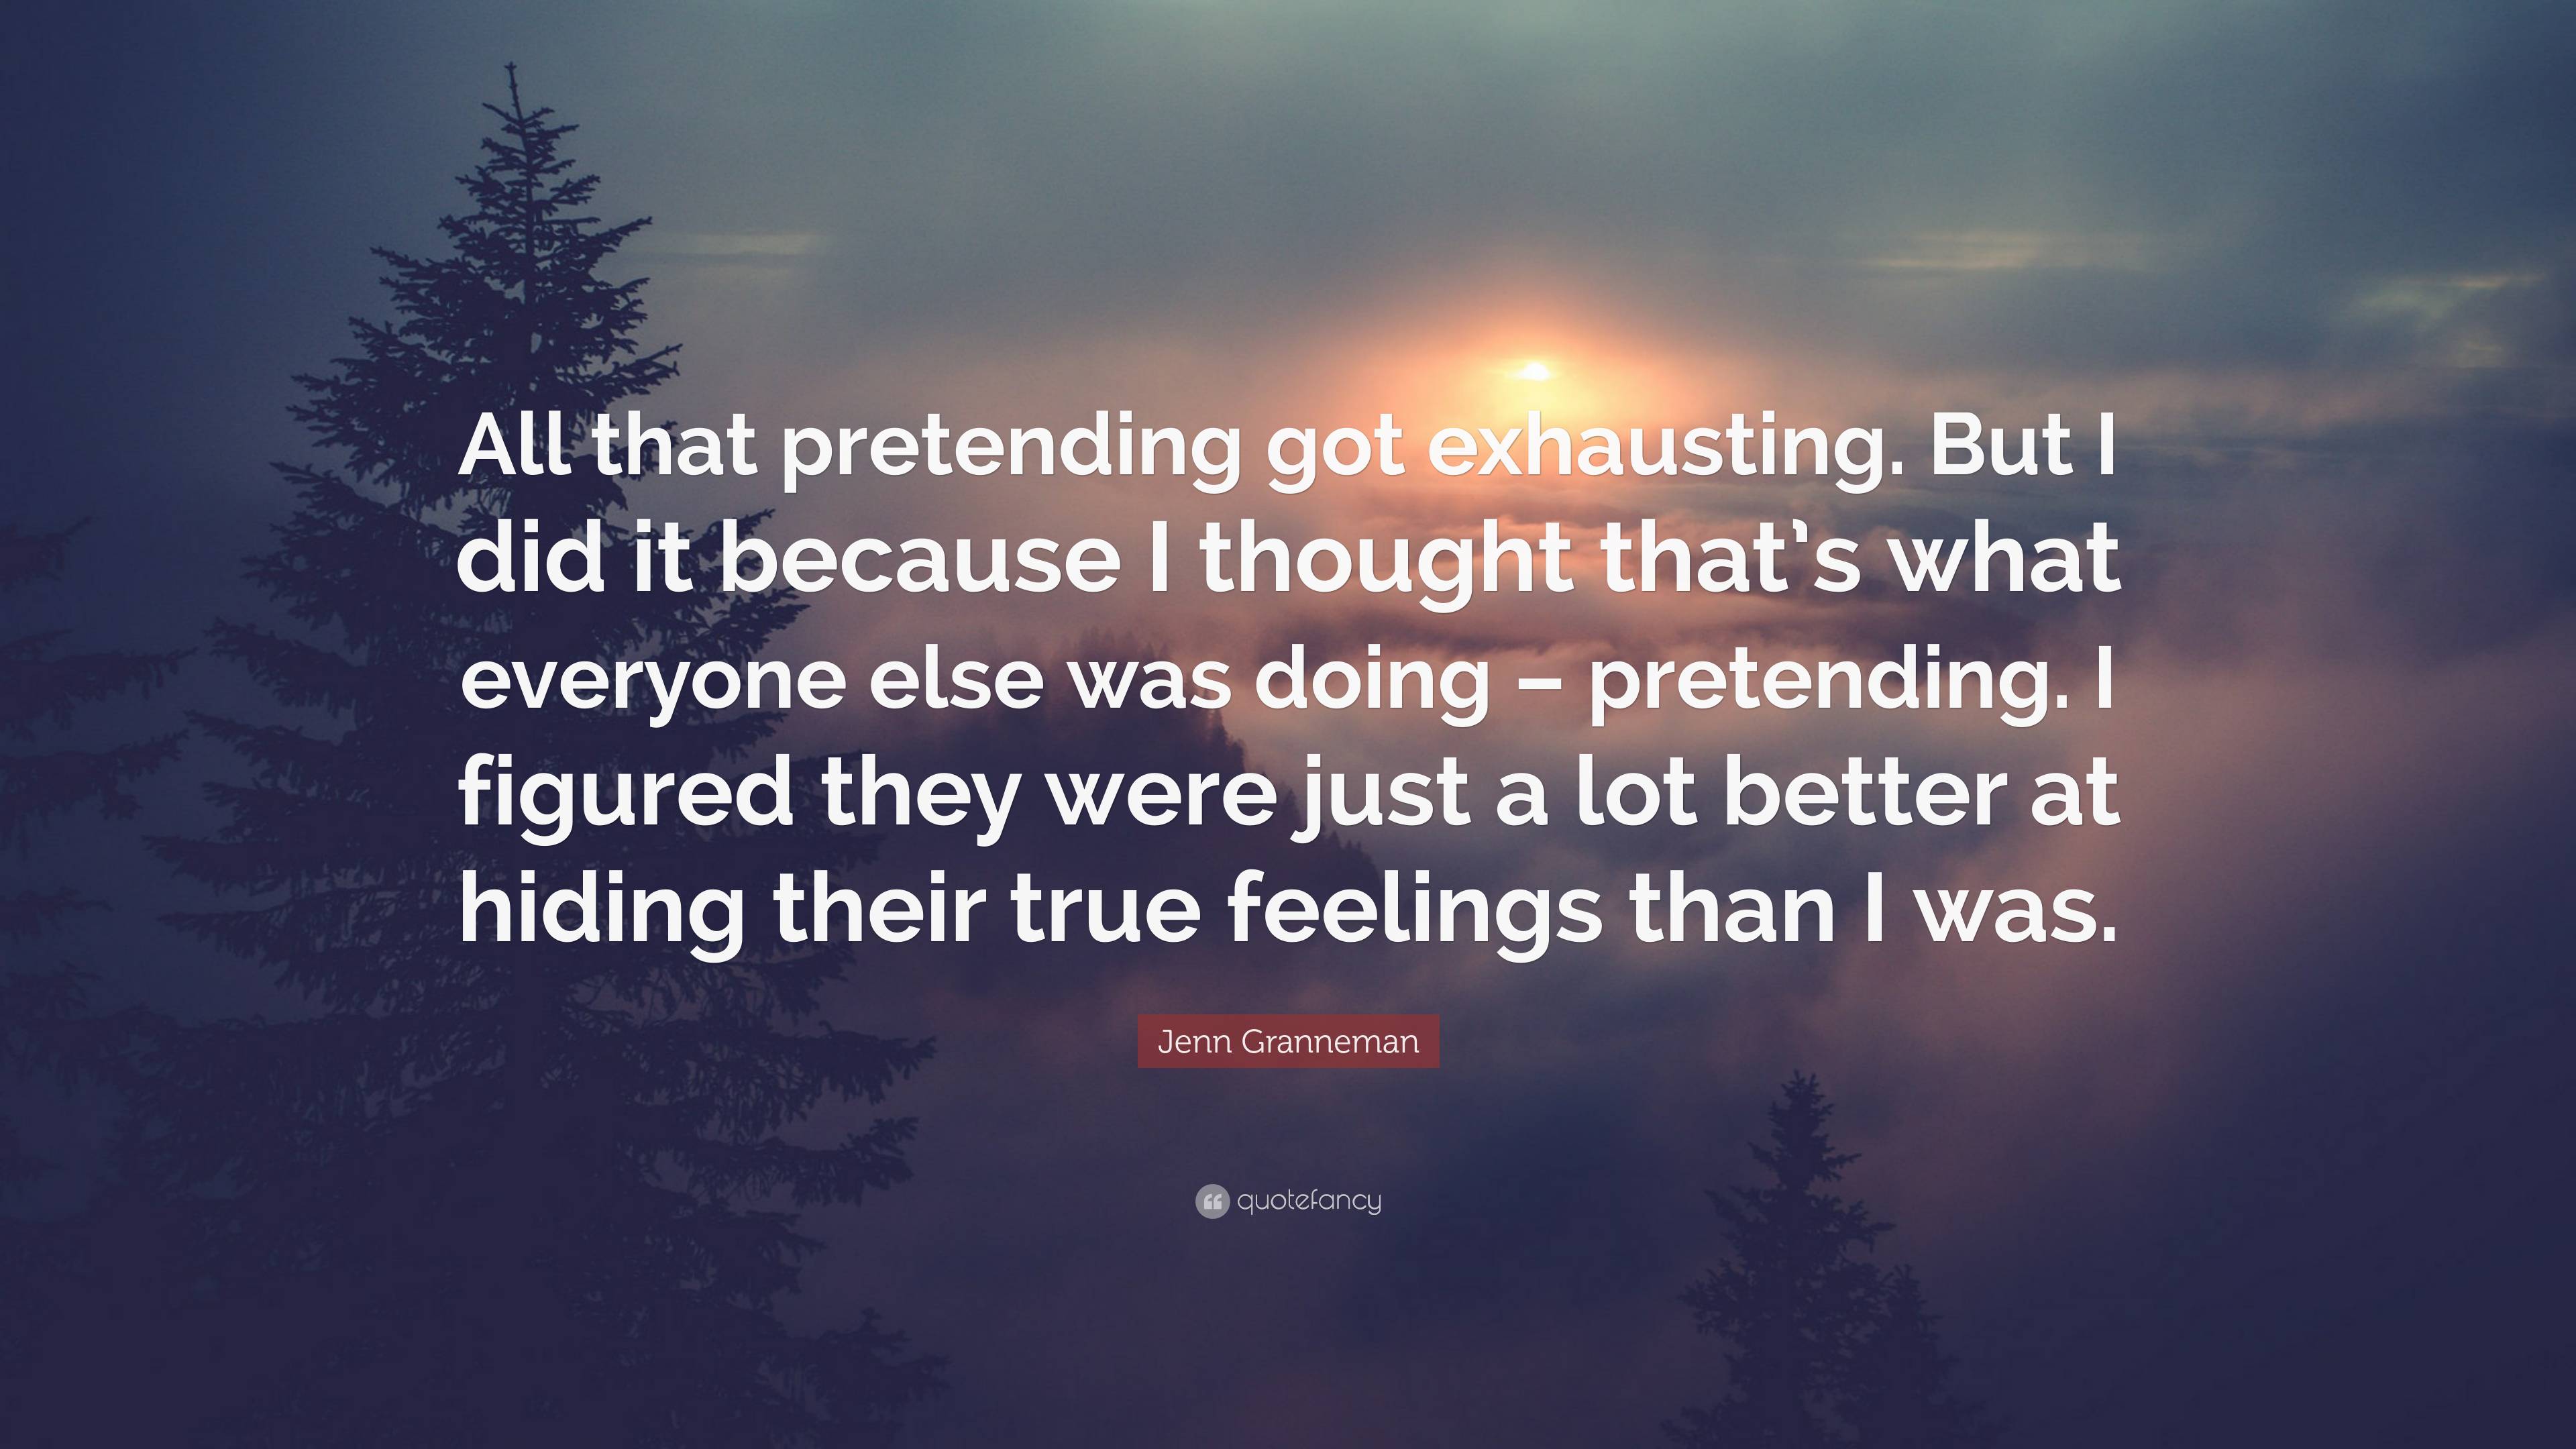 Jenn Granneman Quote: “All that pretending got exhausting. But I did it  because I thought that's what everyone else was doing – pretending. I f”